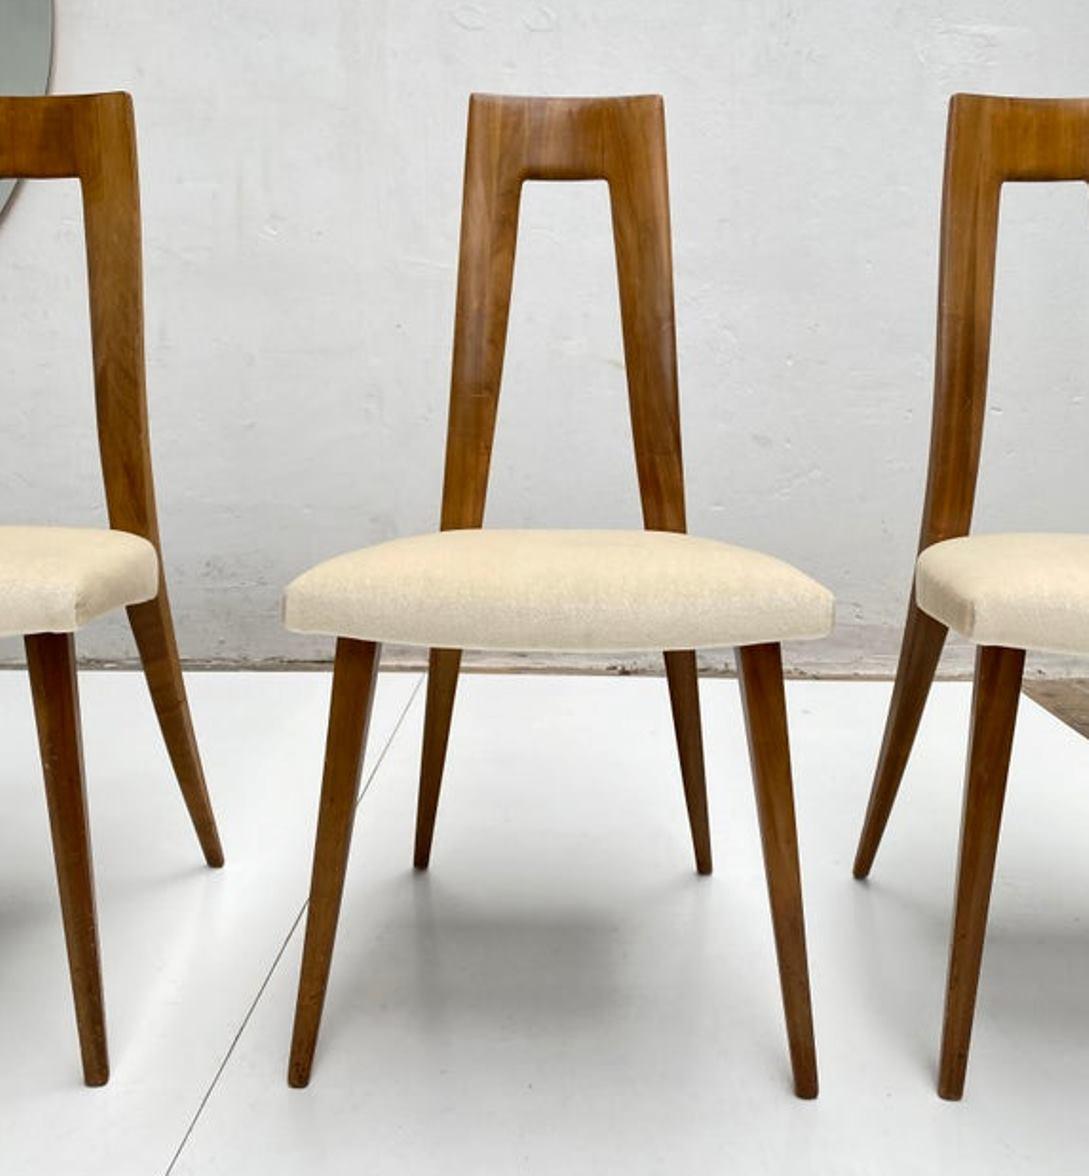 Six Sculptural Form 'Turin School' Walnut & Mohair Dining Chairs, Italy, 1940's 3